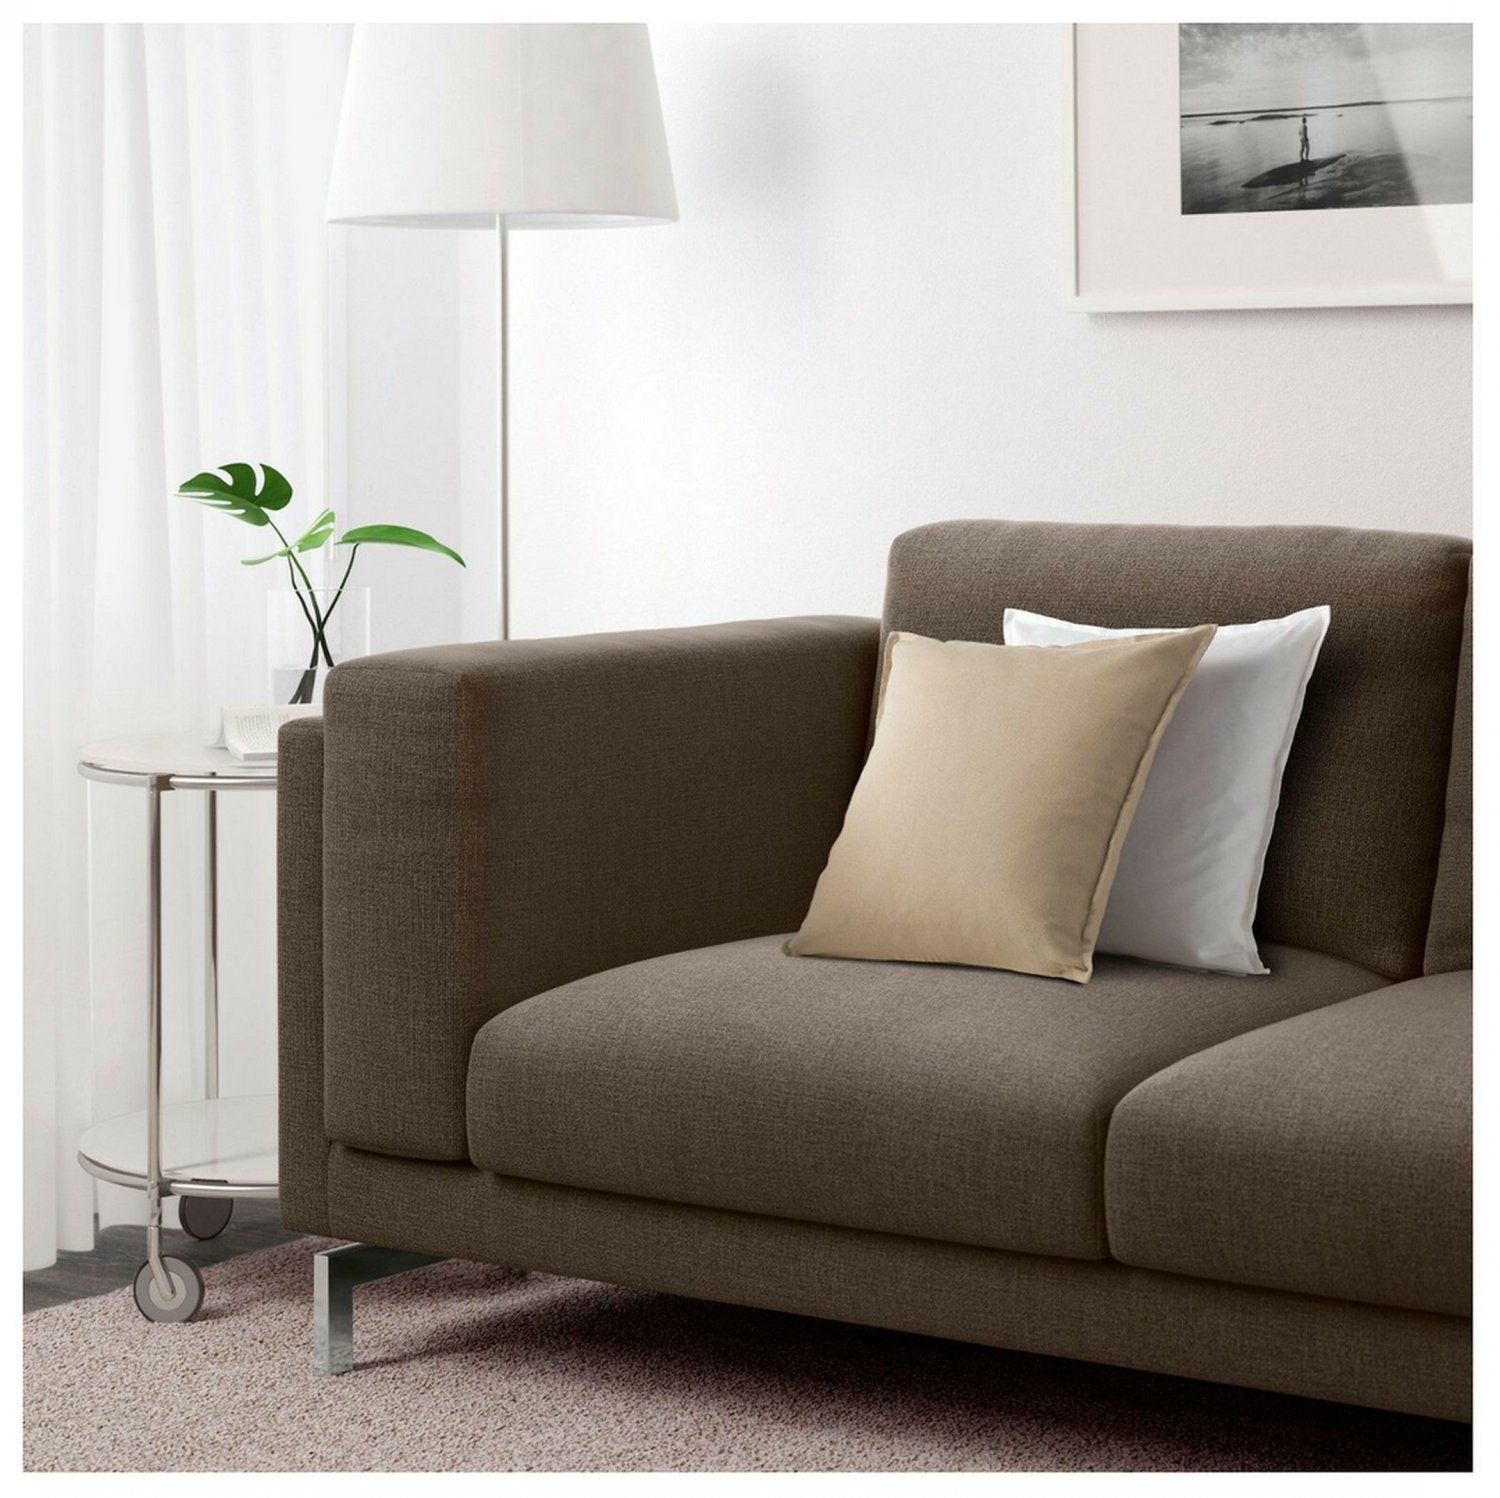 NEW Ikea Nockeby COVER SET ONLY for 2 seat sofa in Tenö Brown 